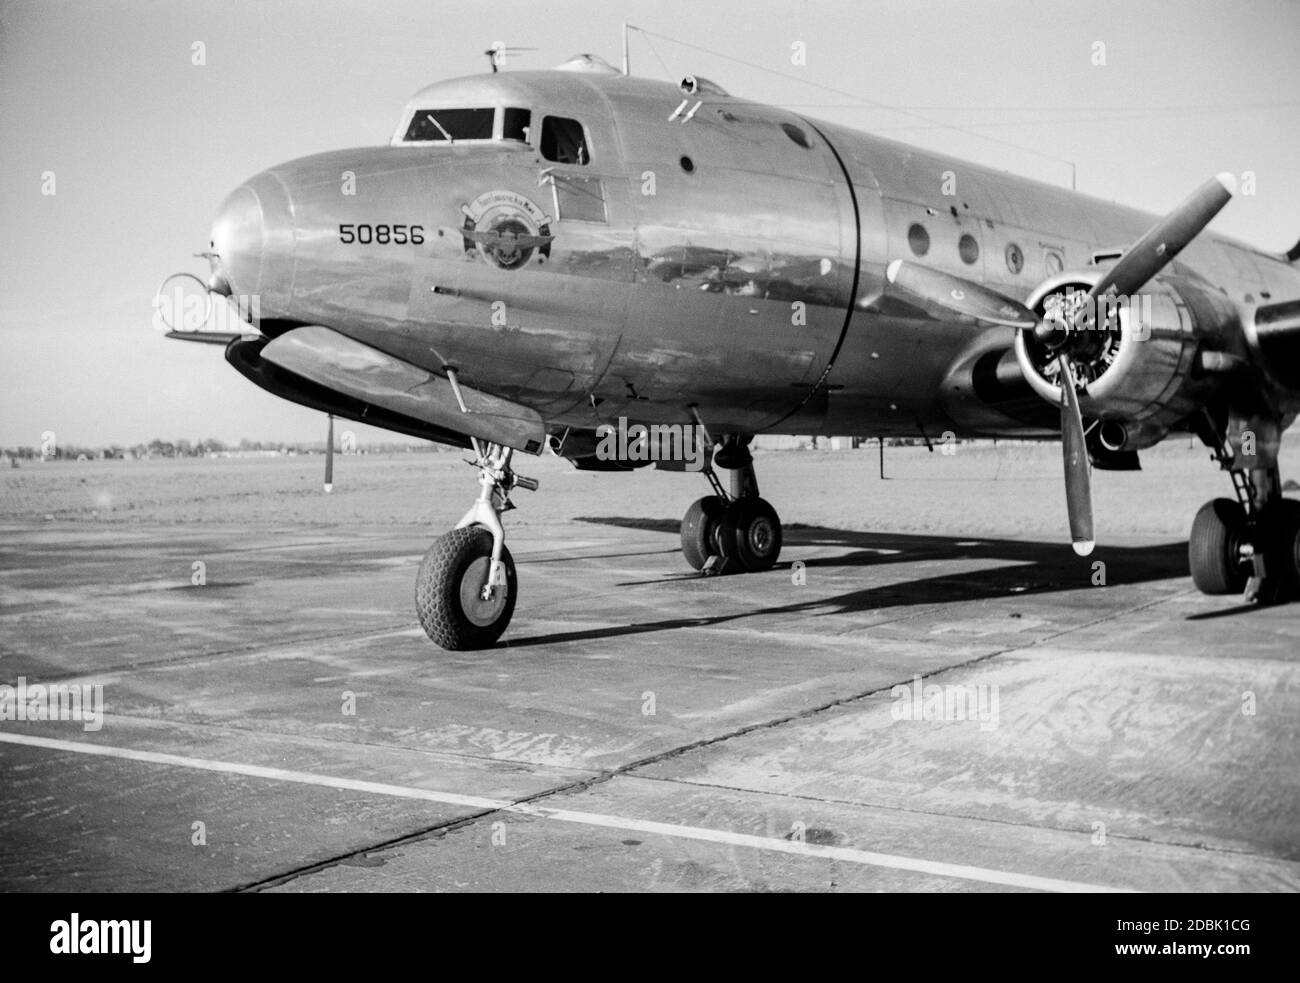 https://c8.alamy.com/comp/2DBK1CG/a-united-states-navy-usn-douglas-r5d-2-a-version-of-the-c-54-spymaster-and-douglas-dc-4-at-croydon-airport-in-england-during-the-1950s-2DBK1CG.jpg